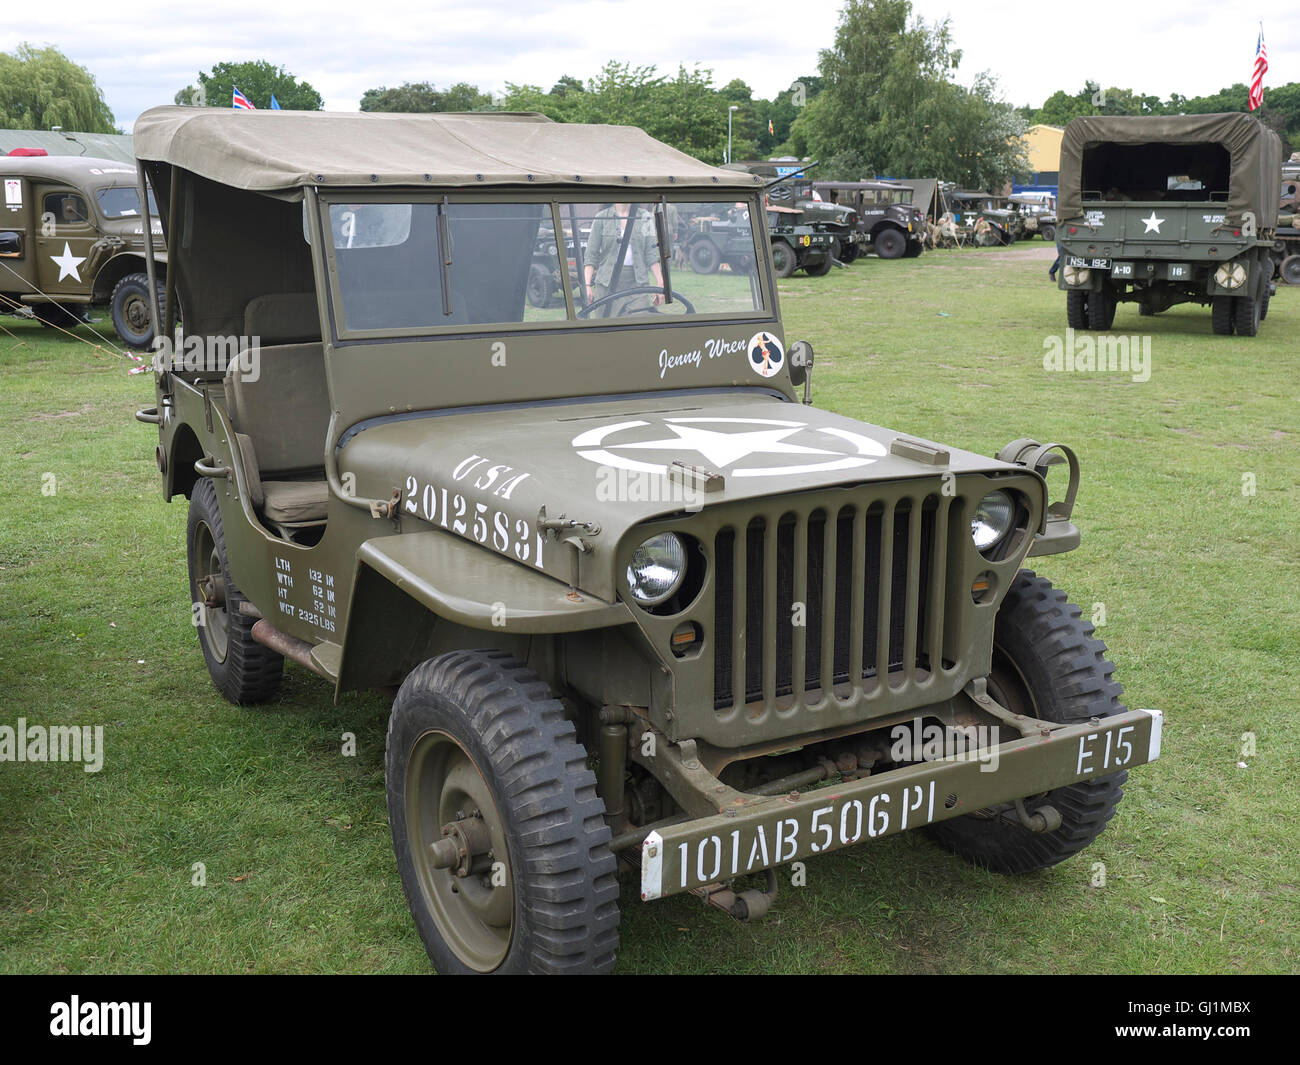 Vintage US army jeep from world war 2 at woodhall spa 40's weekend Stock Photo